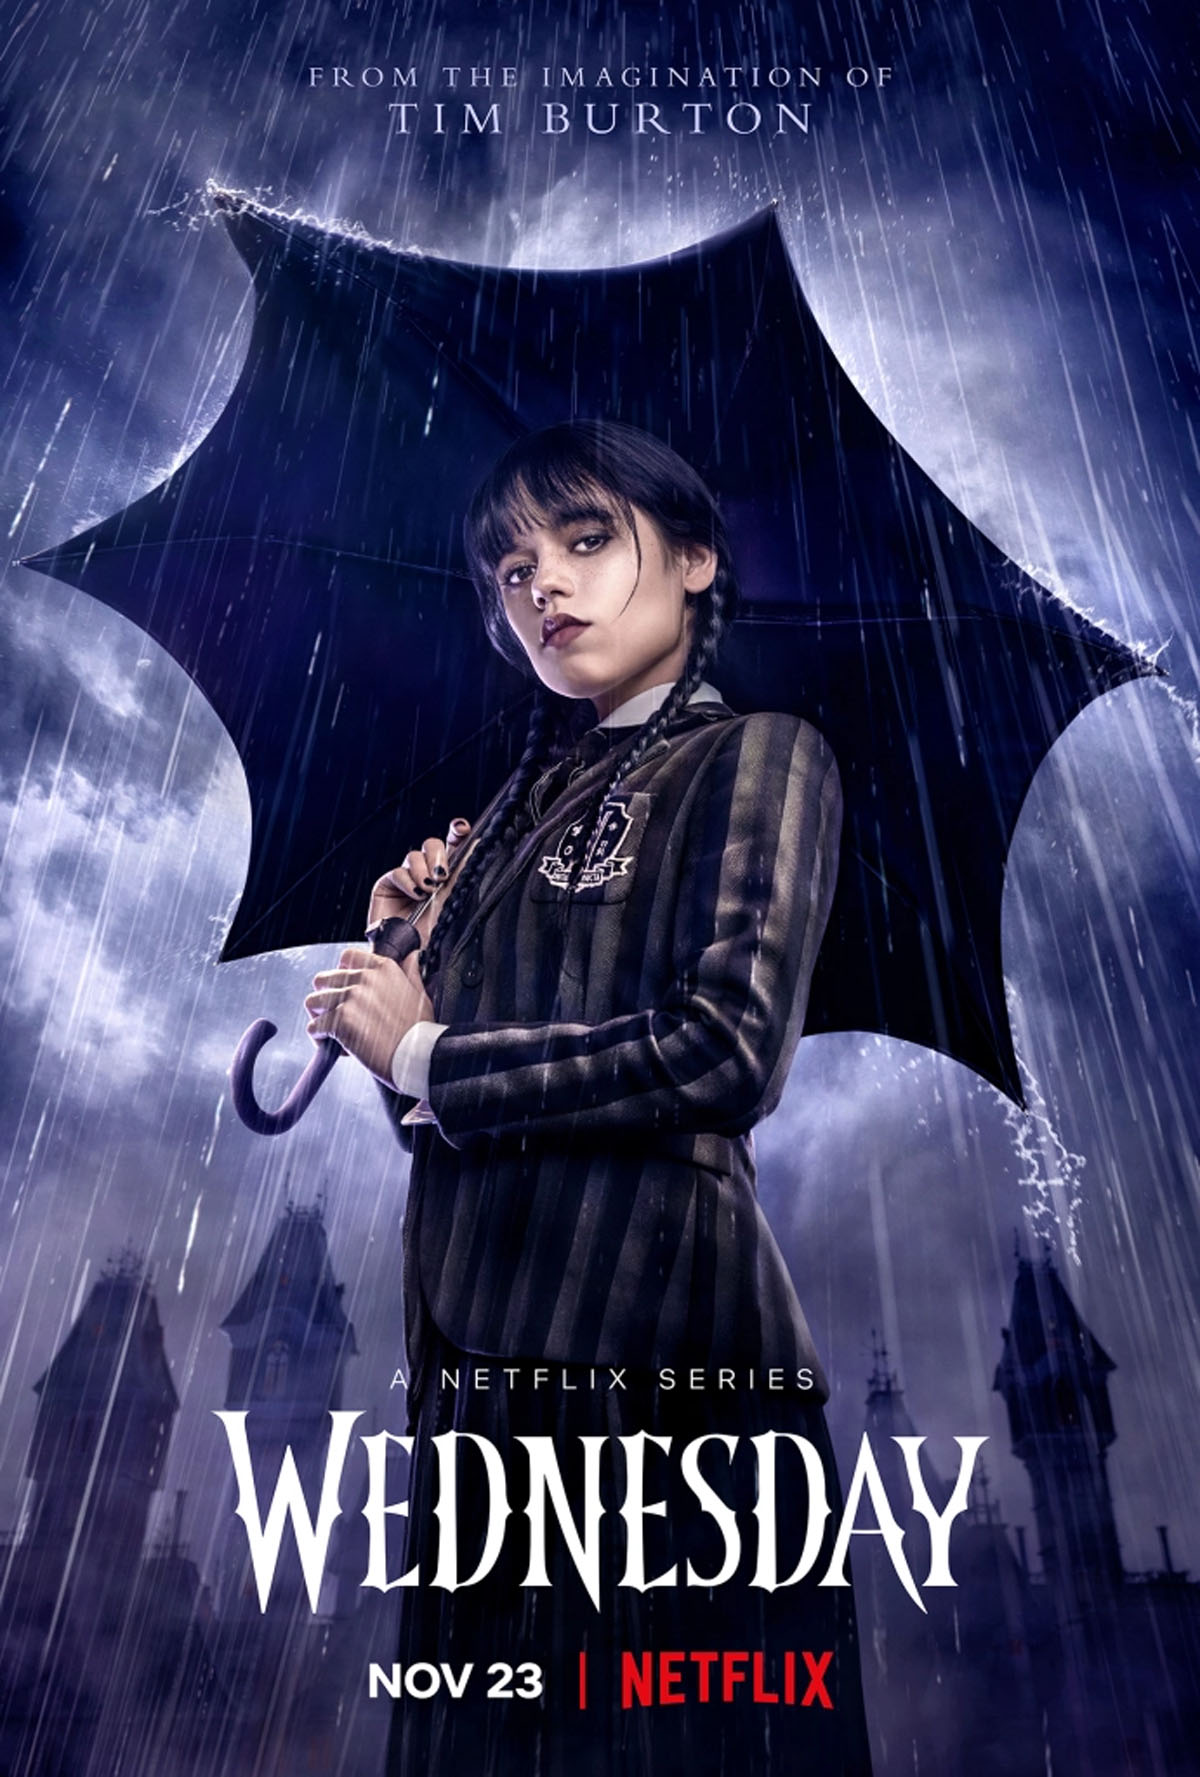 New Wednesday Poster Reveals the Premiere Date on Netflix